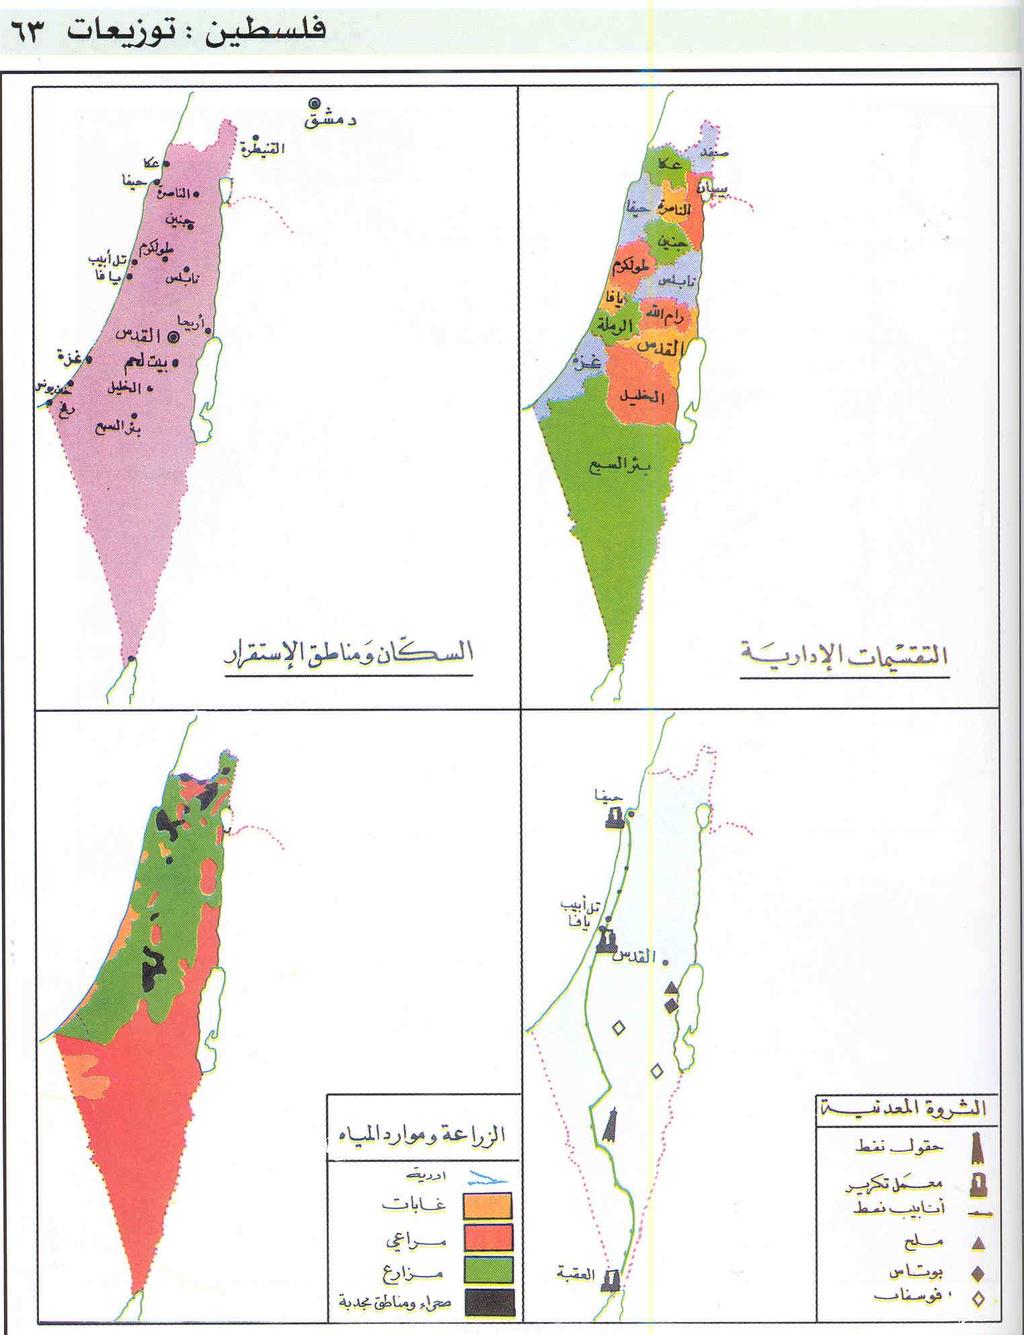 Palestine: Divisions Population and Settlement Administrative Division [Mandate period] Agriculture and